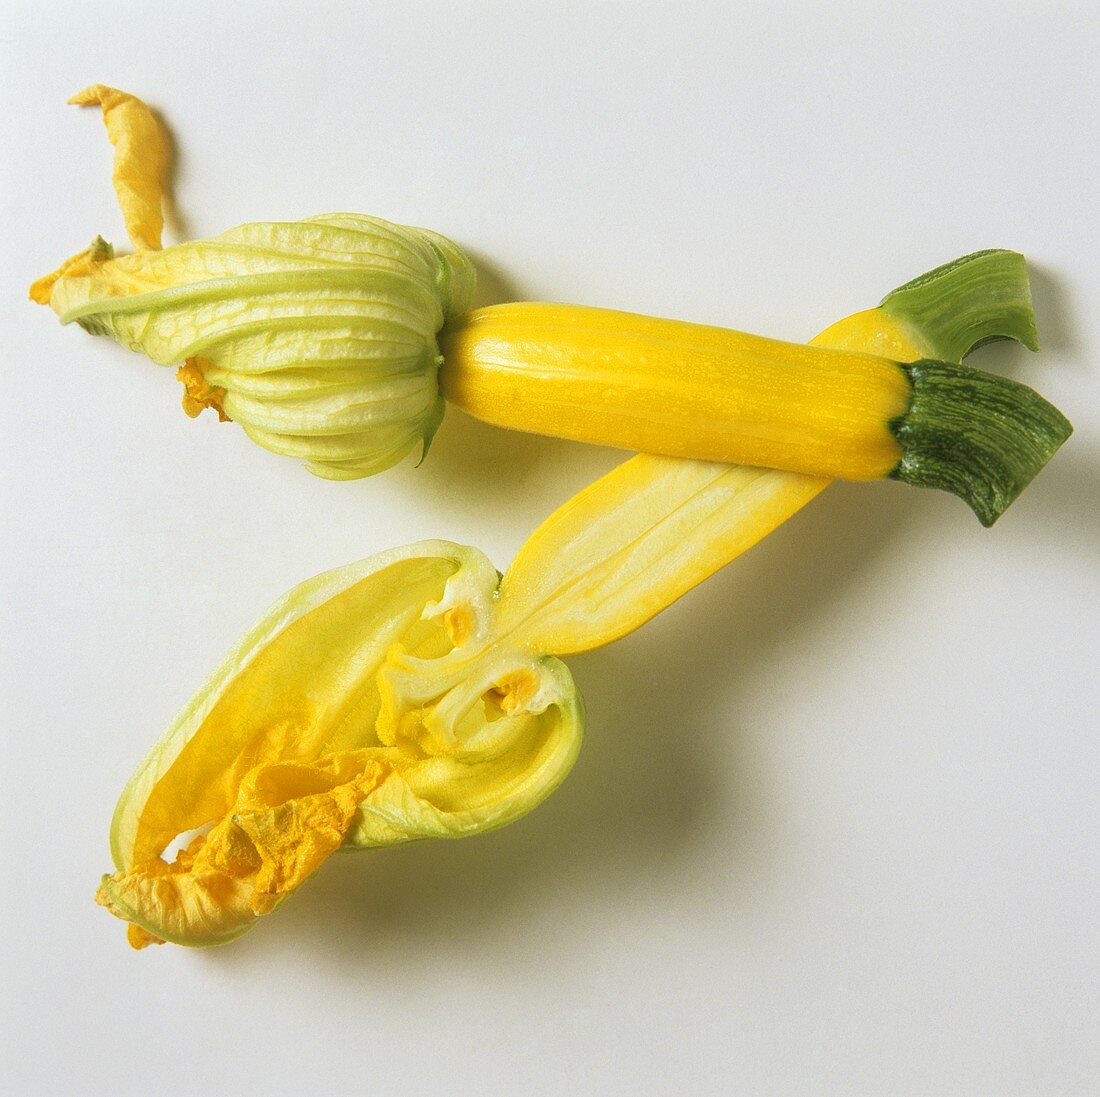 Summer Squash with Blossoms Cut in Half